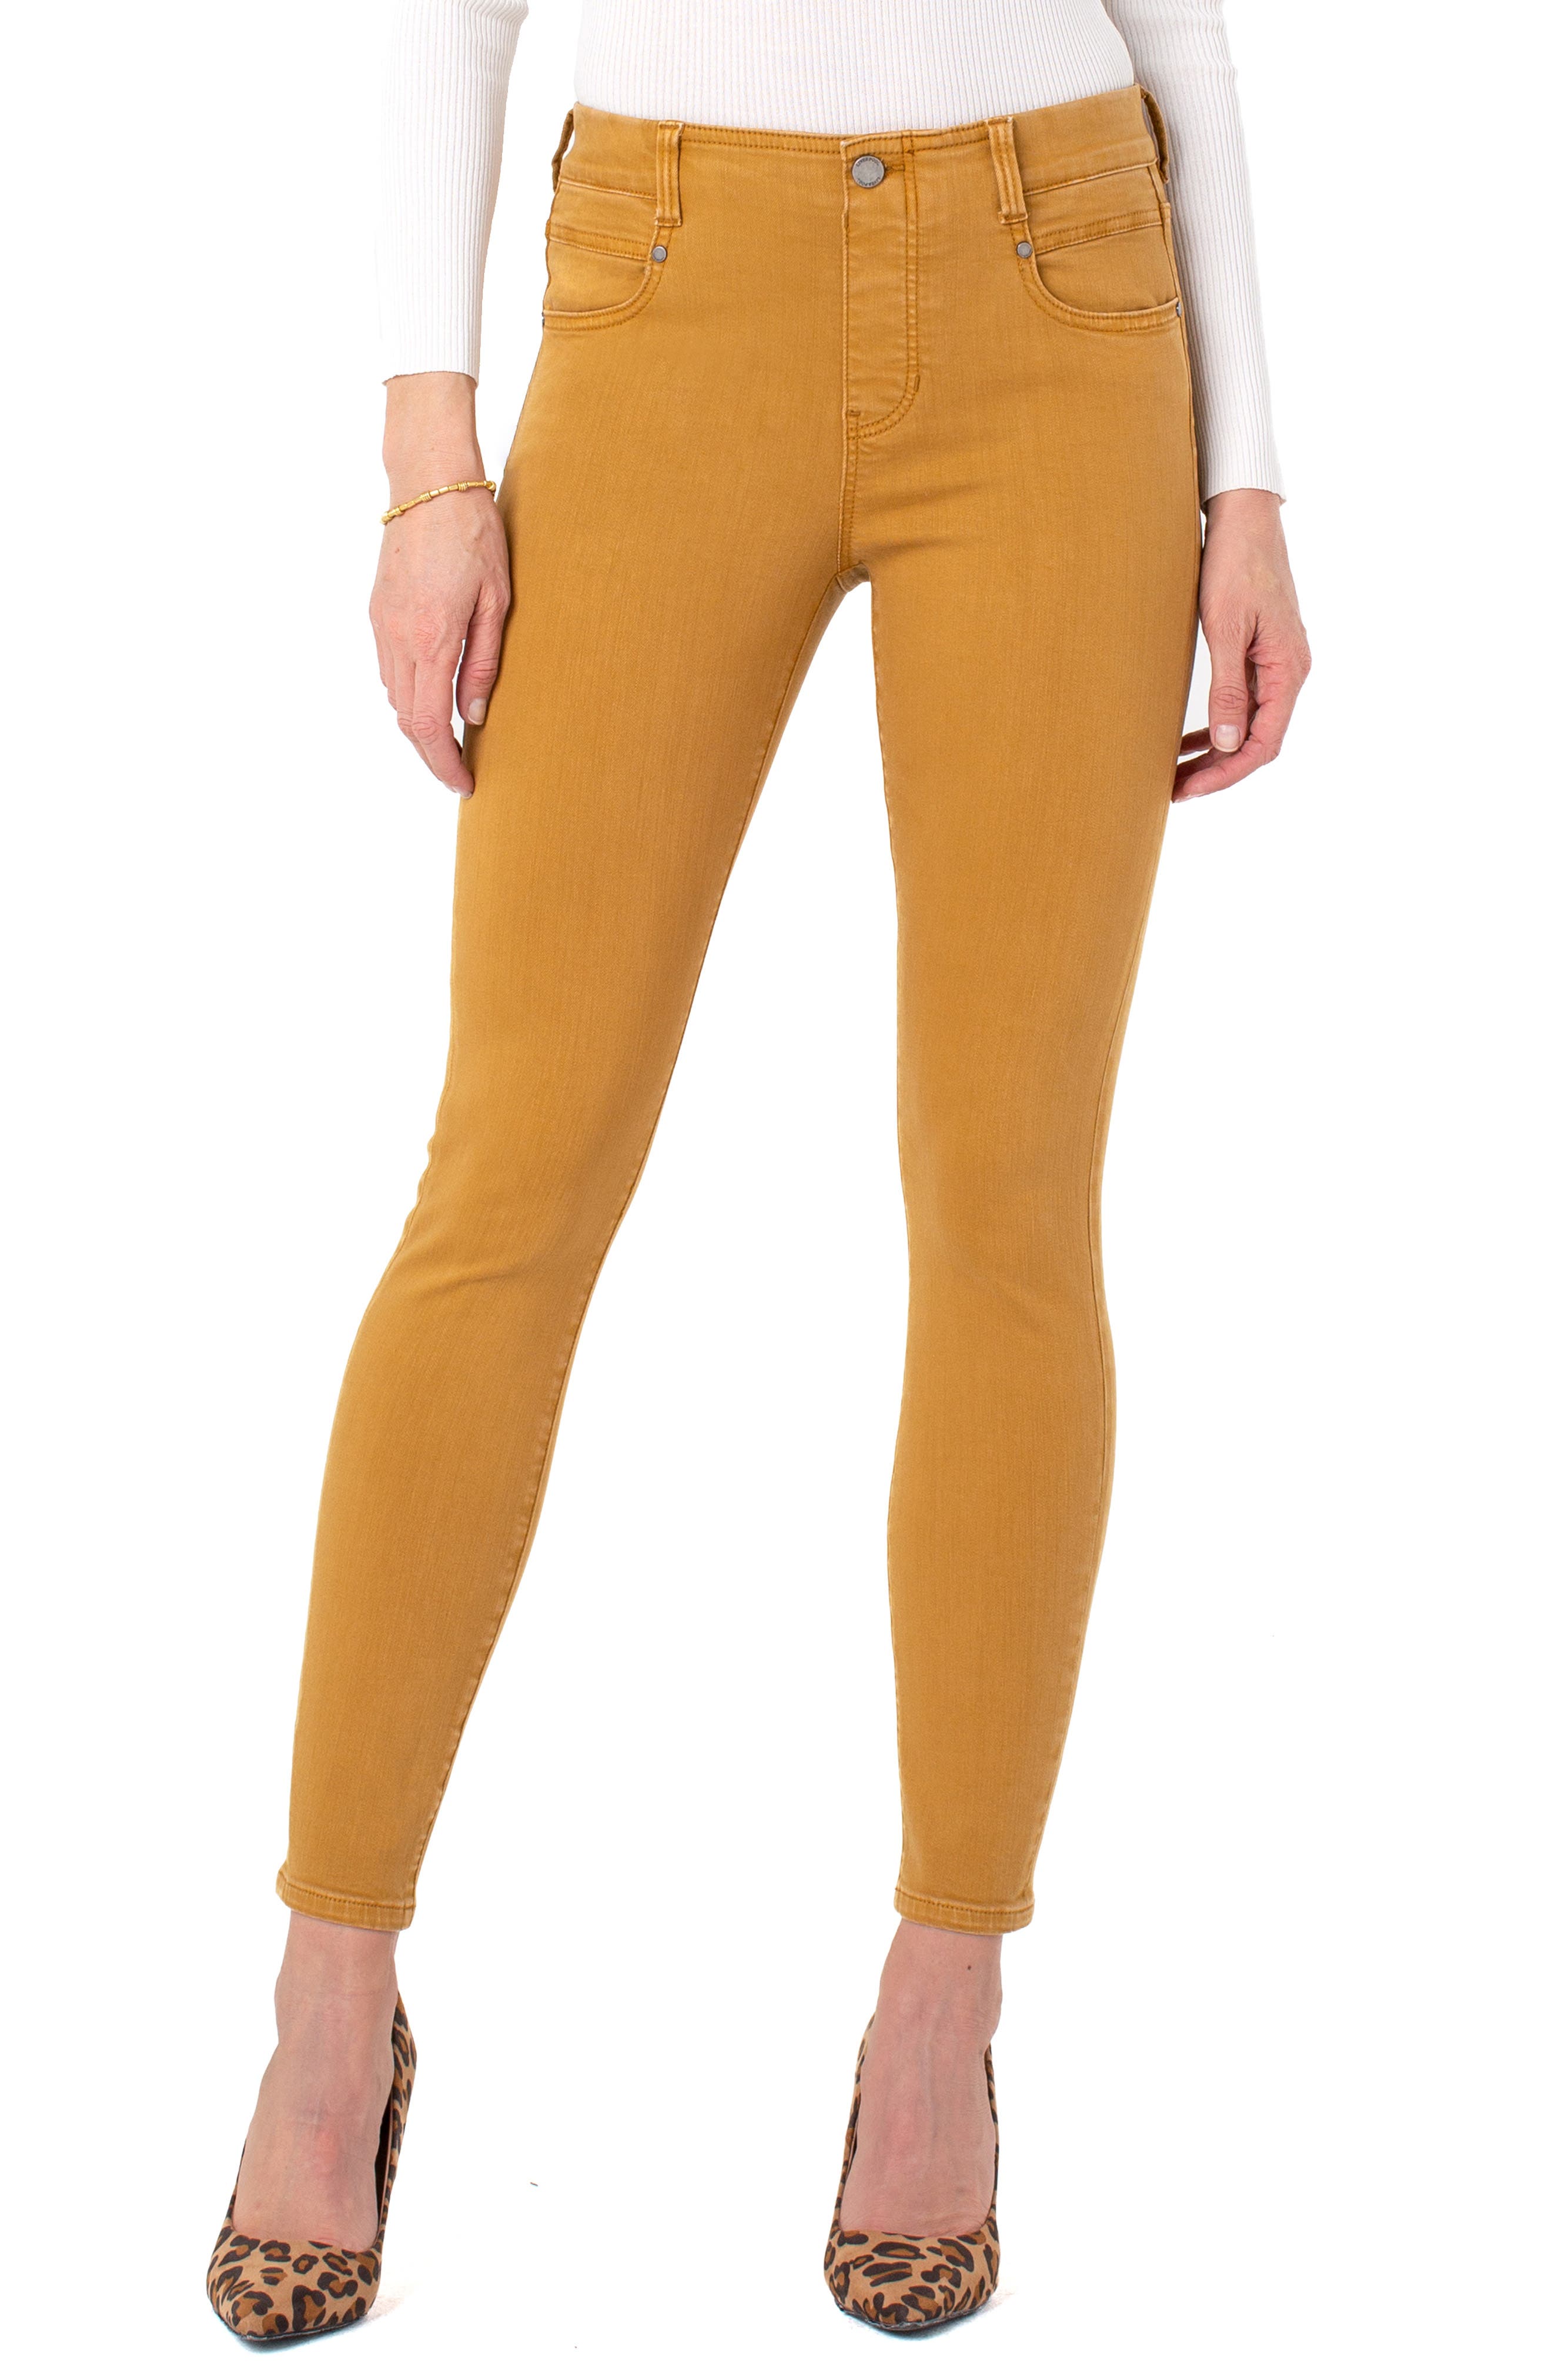 yellow jeans high waisted